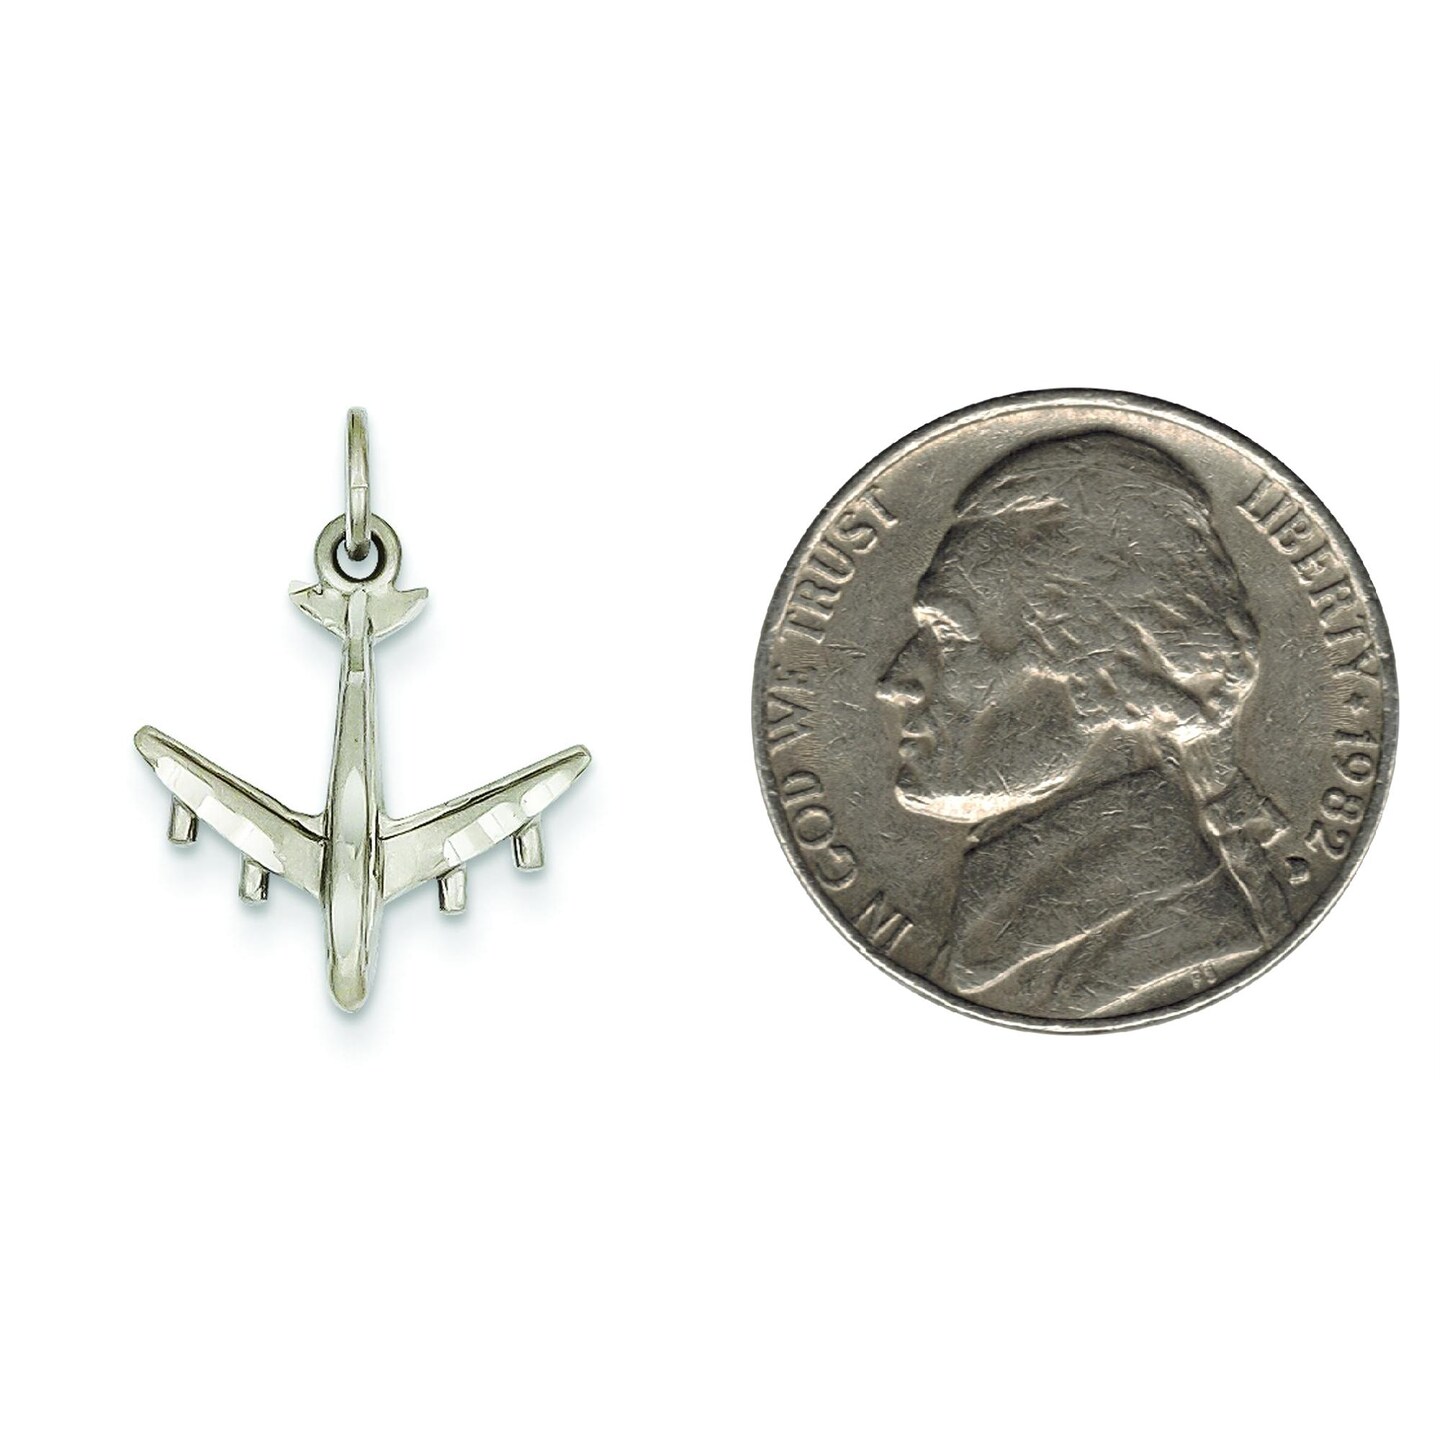 14K White Gold Polished 3D Airplane Charm Jewelry 21.5mm x 16mm